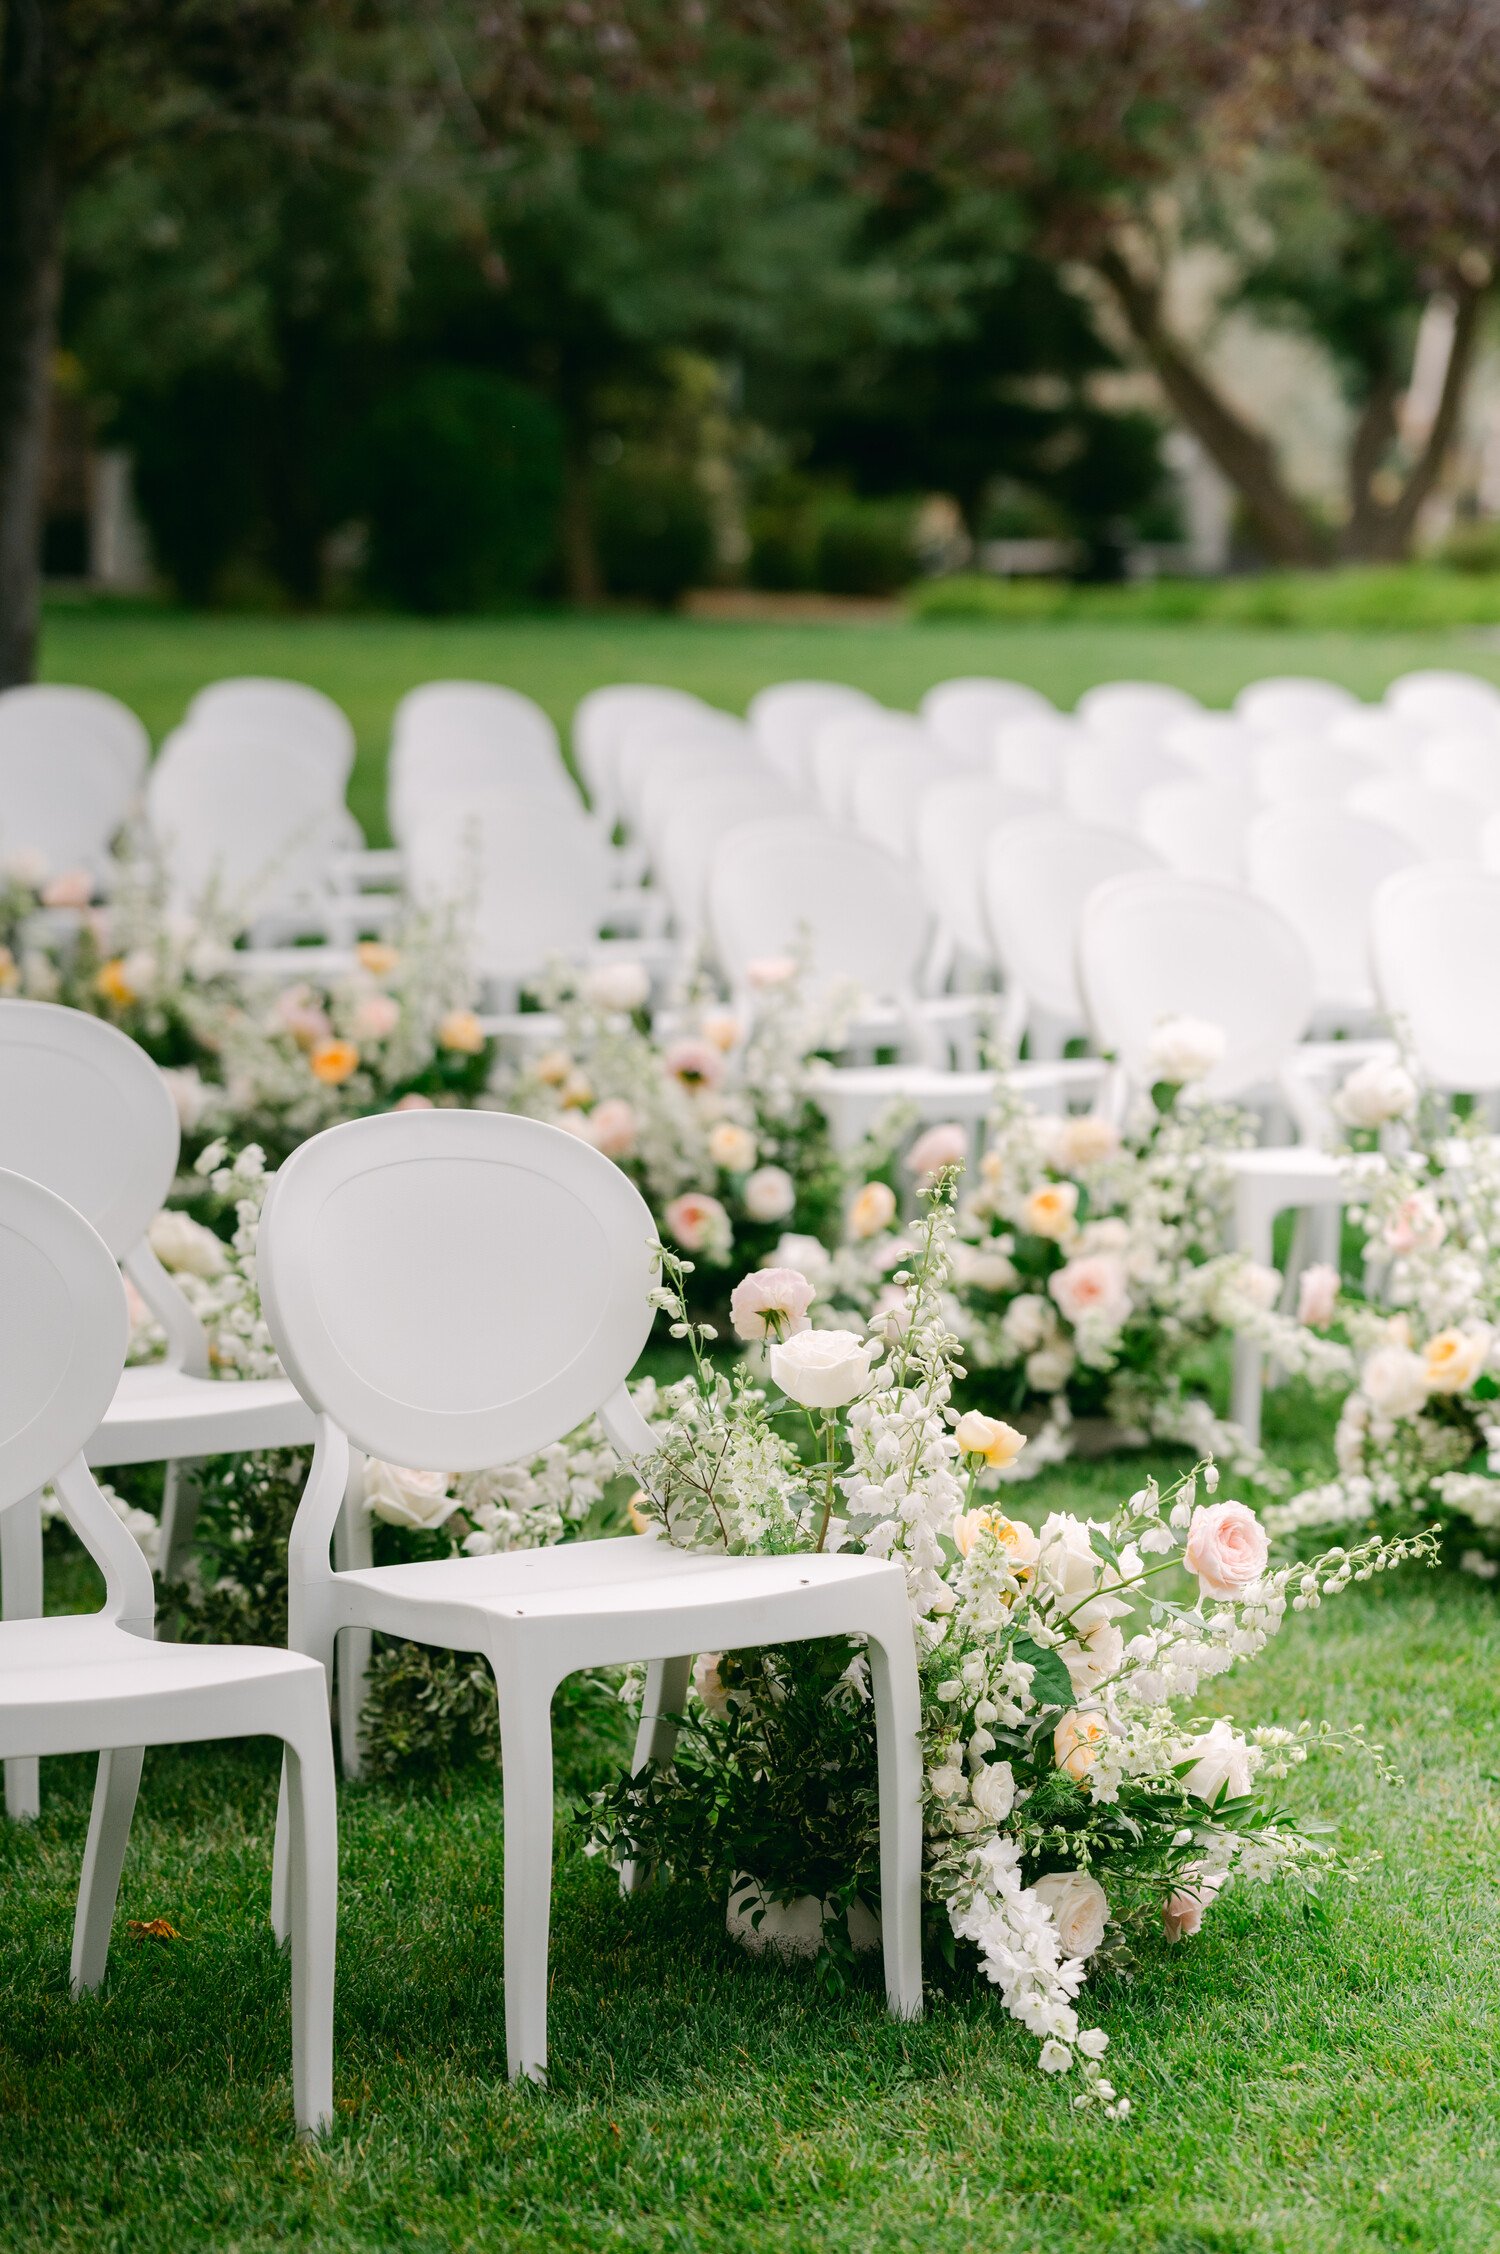 Elm Estate Wedding photos, photo of the chair set up with soft colored flower arrangements for the outdoor wedding ceremony